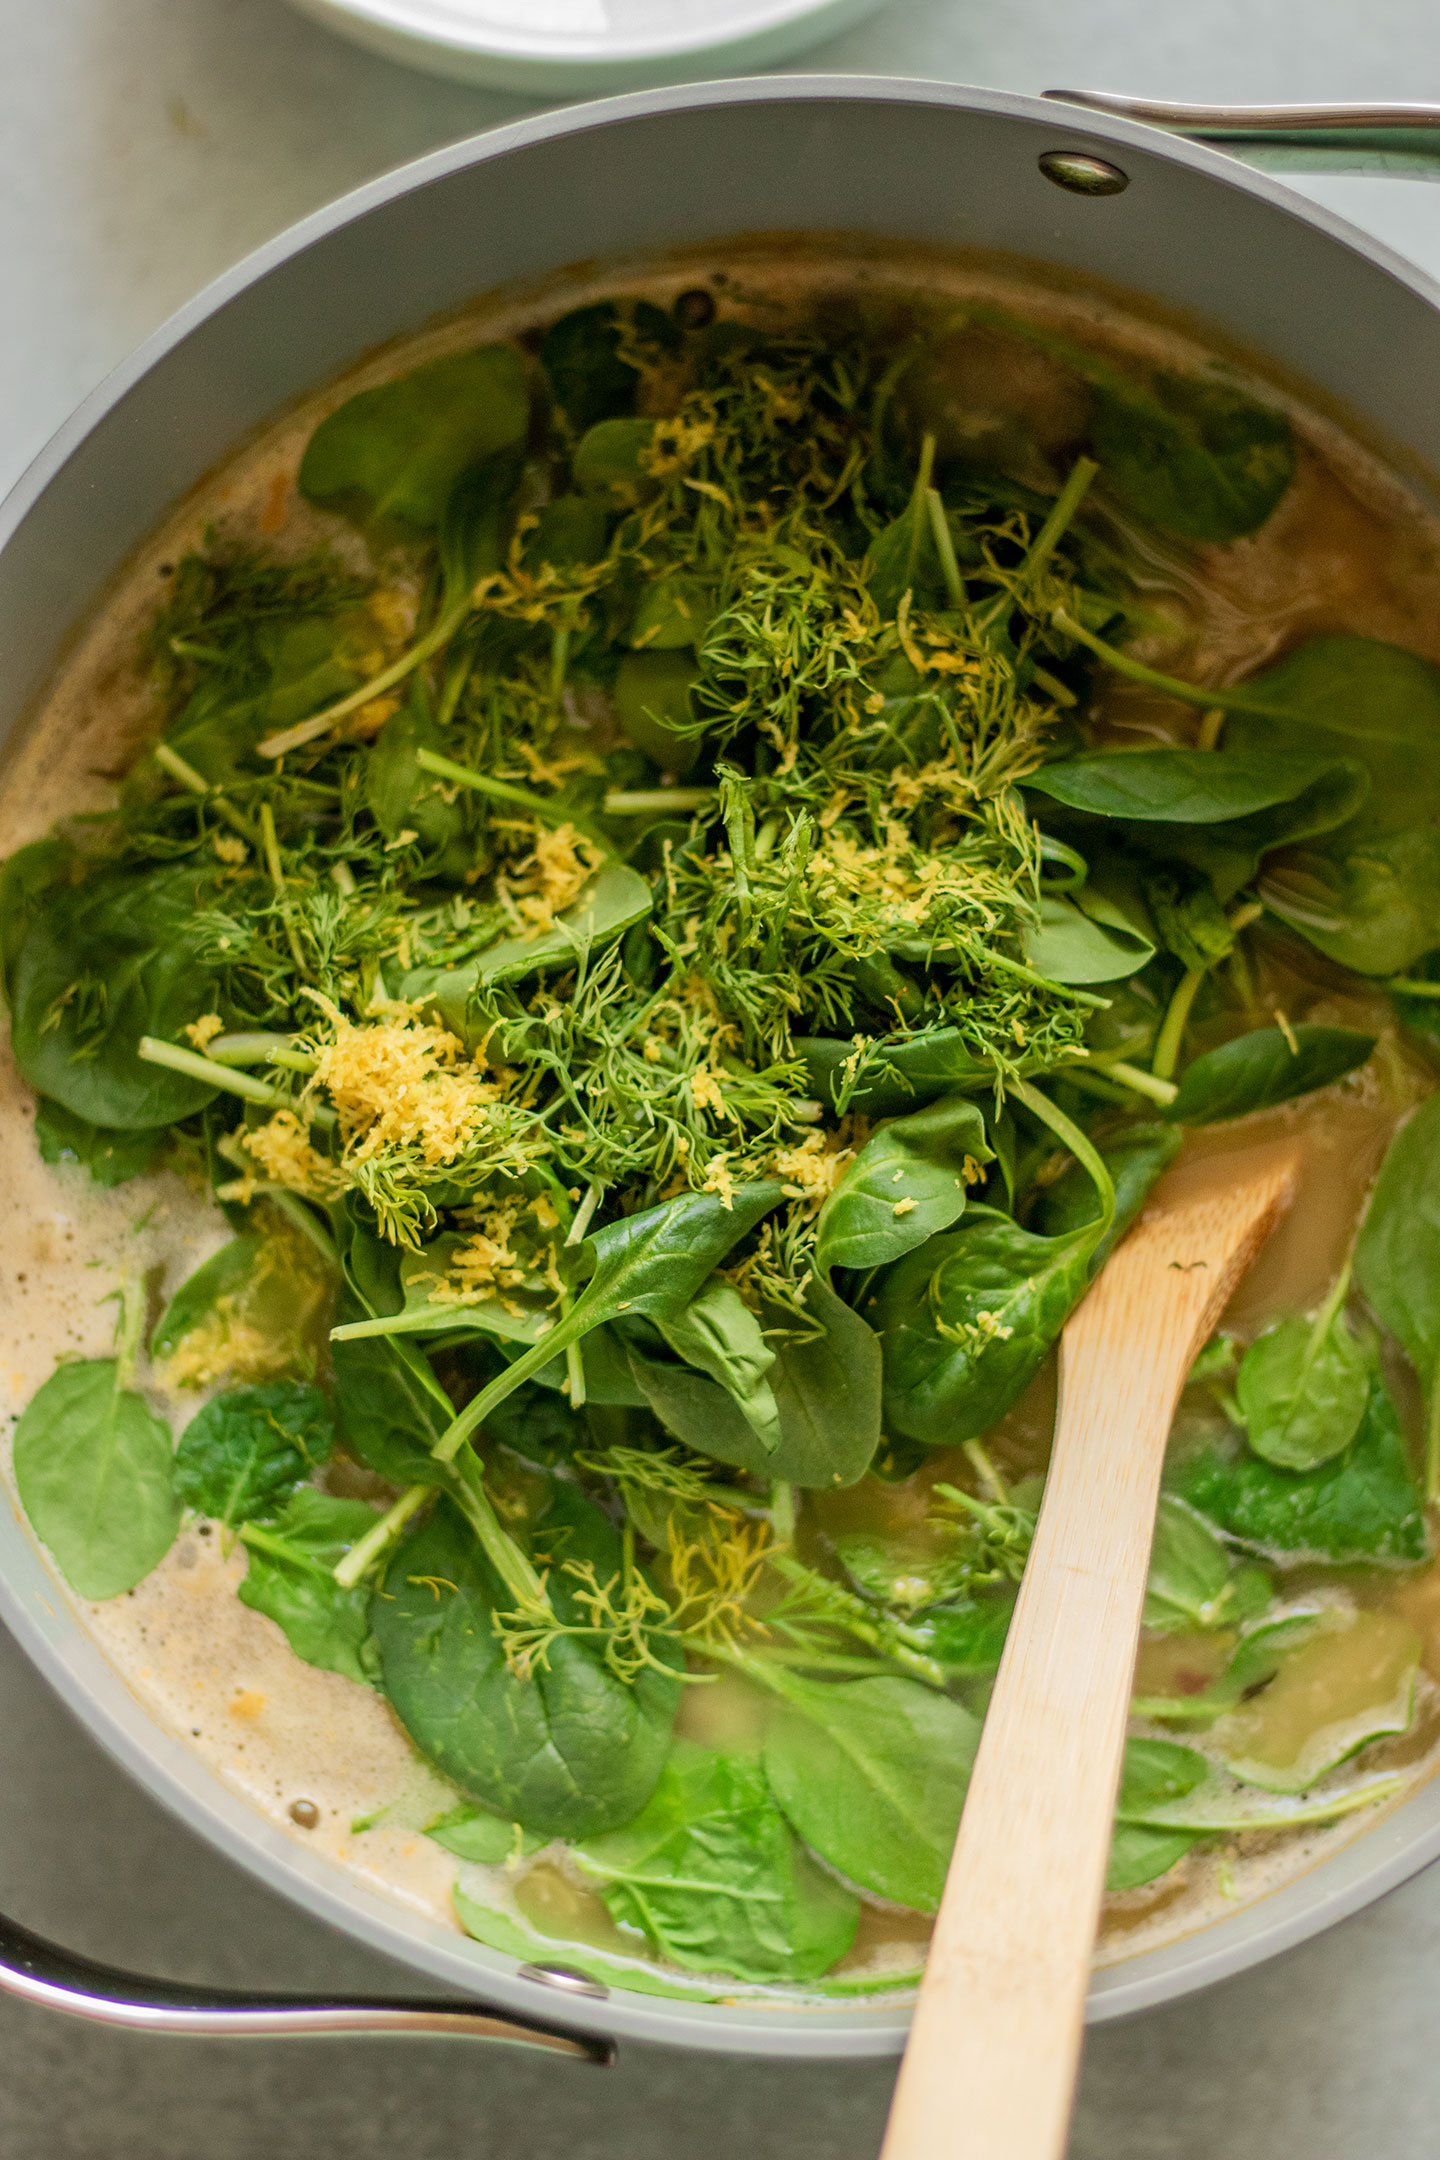 Adding spinach, lemon zest and dill to the soup pot after the potatoes cooked through.